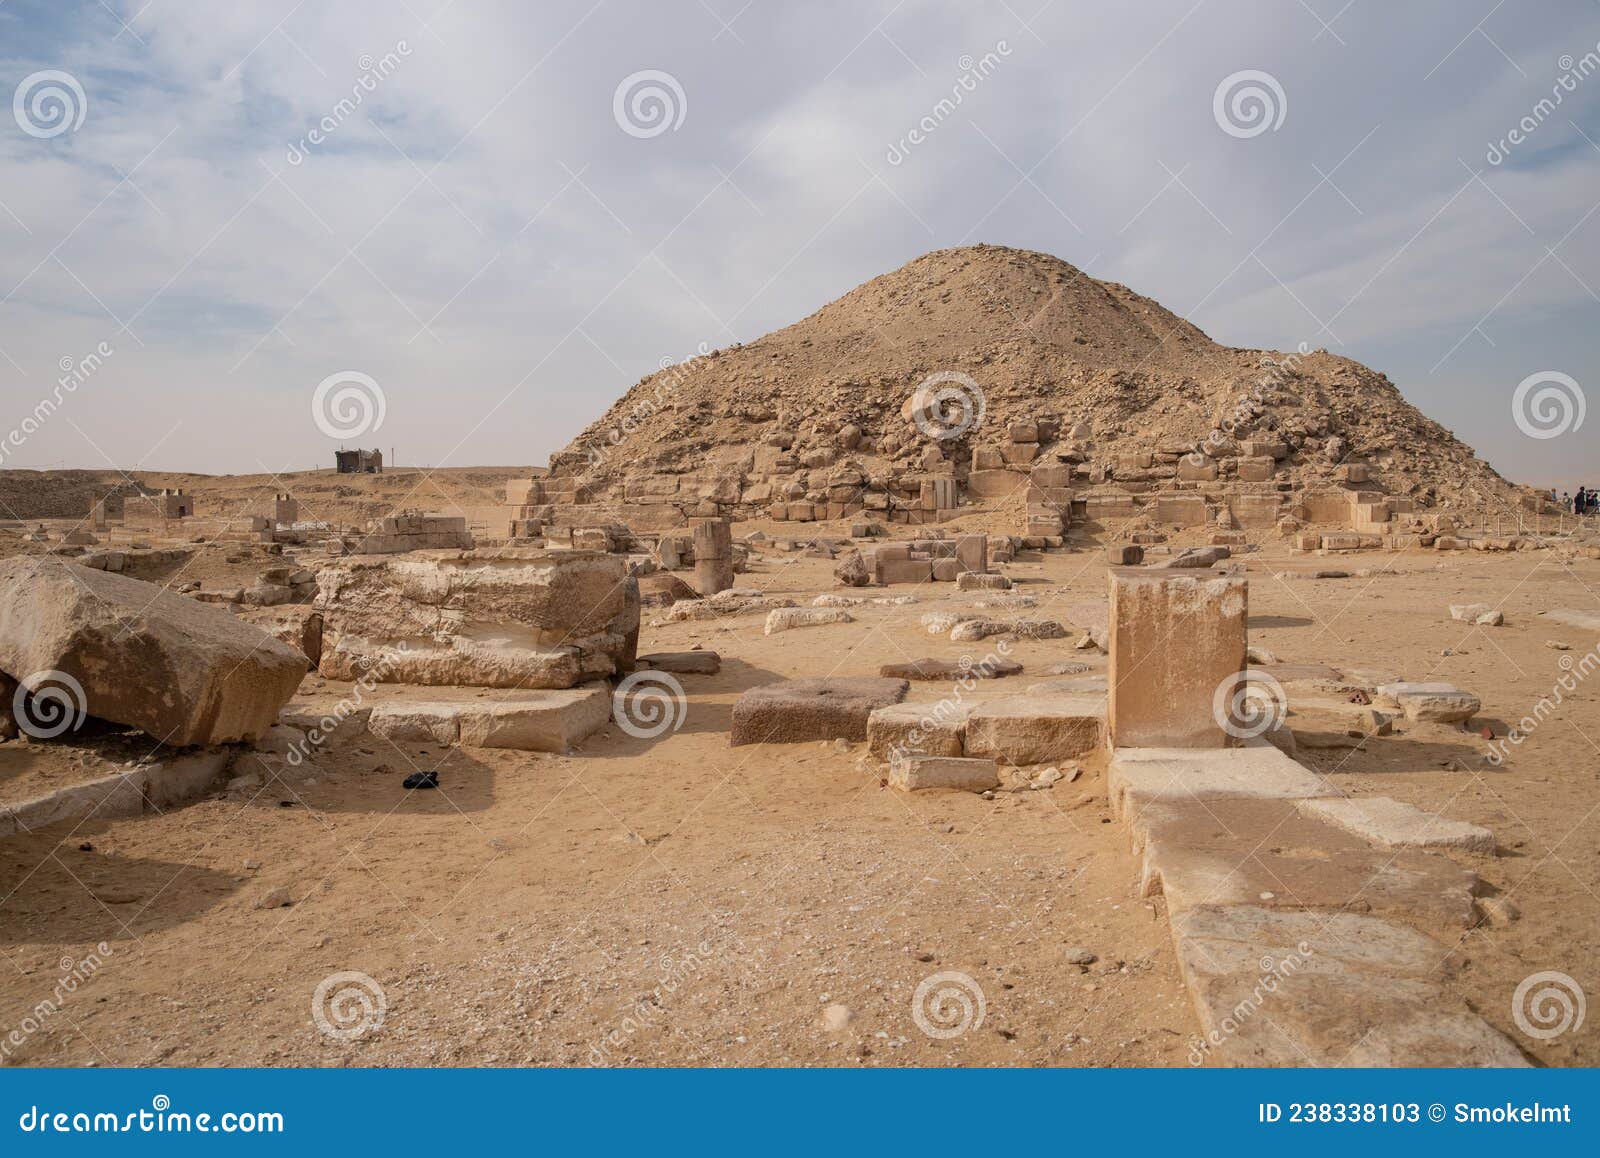 view to pyramid of unas from archeological remain in the saqqara necropolis, egypt